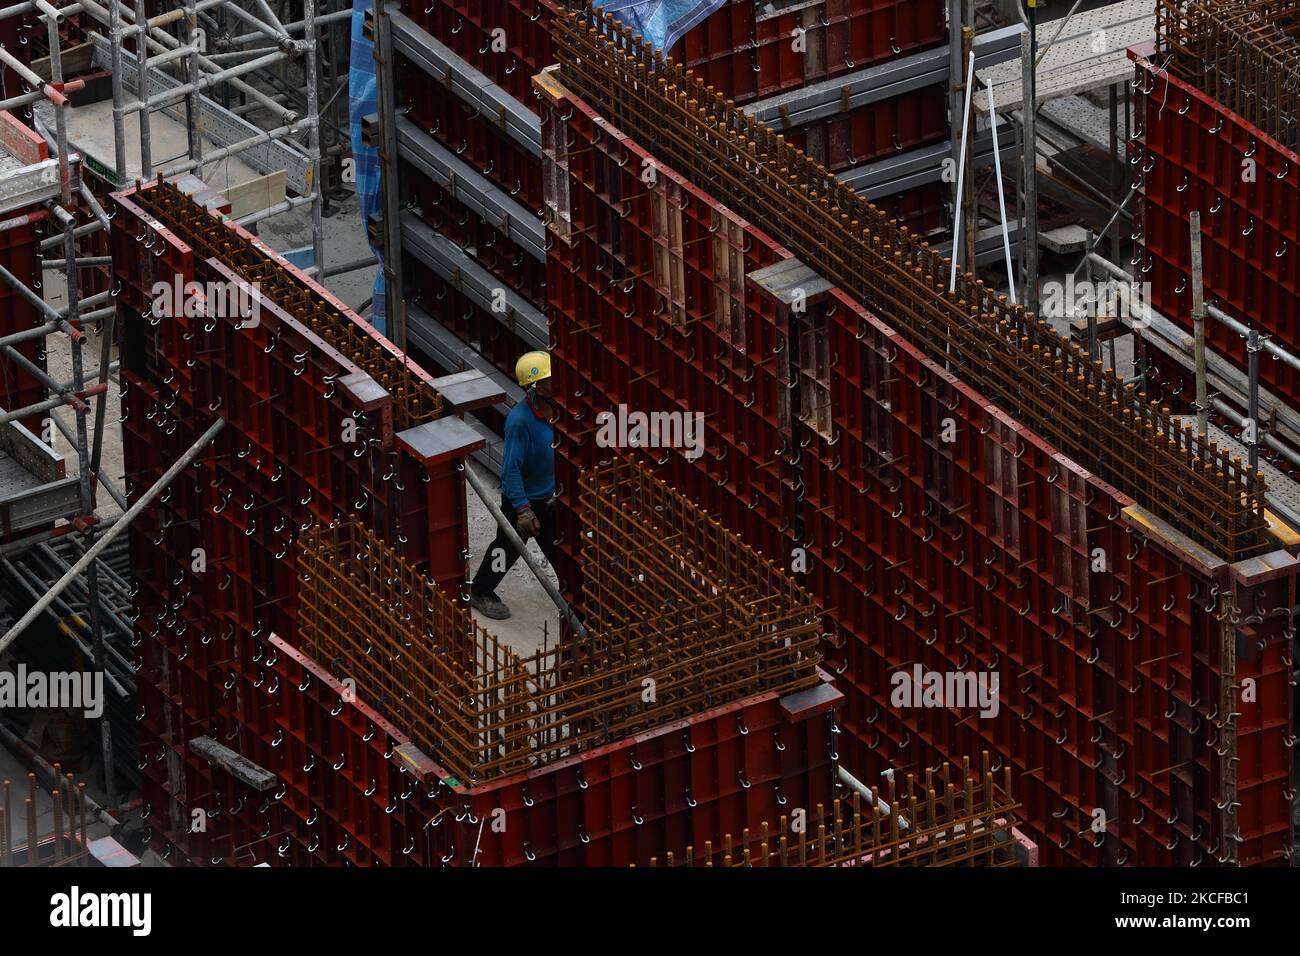 A migrant worker works at a building construction site on May 29, 2021 in Singapore. Singapore enters a month long heightened alert from May 16 to June 13 to curb the spread of COVID-19 cases in the local community. New restrictions on movements and activities have been introduced such as limiting social interaction to two, prohibiting dining out and a reduced operating capacity at shopping malls, offices and attractions. On May 17, the construction industry stakeholders appealed to Multi-Ministry Taskforce to bring in foreign workers in a safe and controlled manner after the built environment Stock Photo